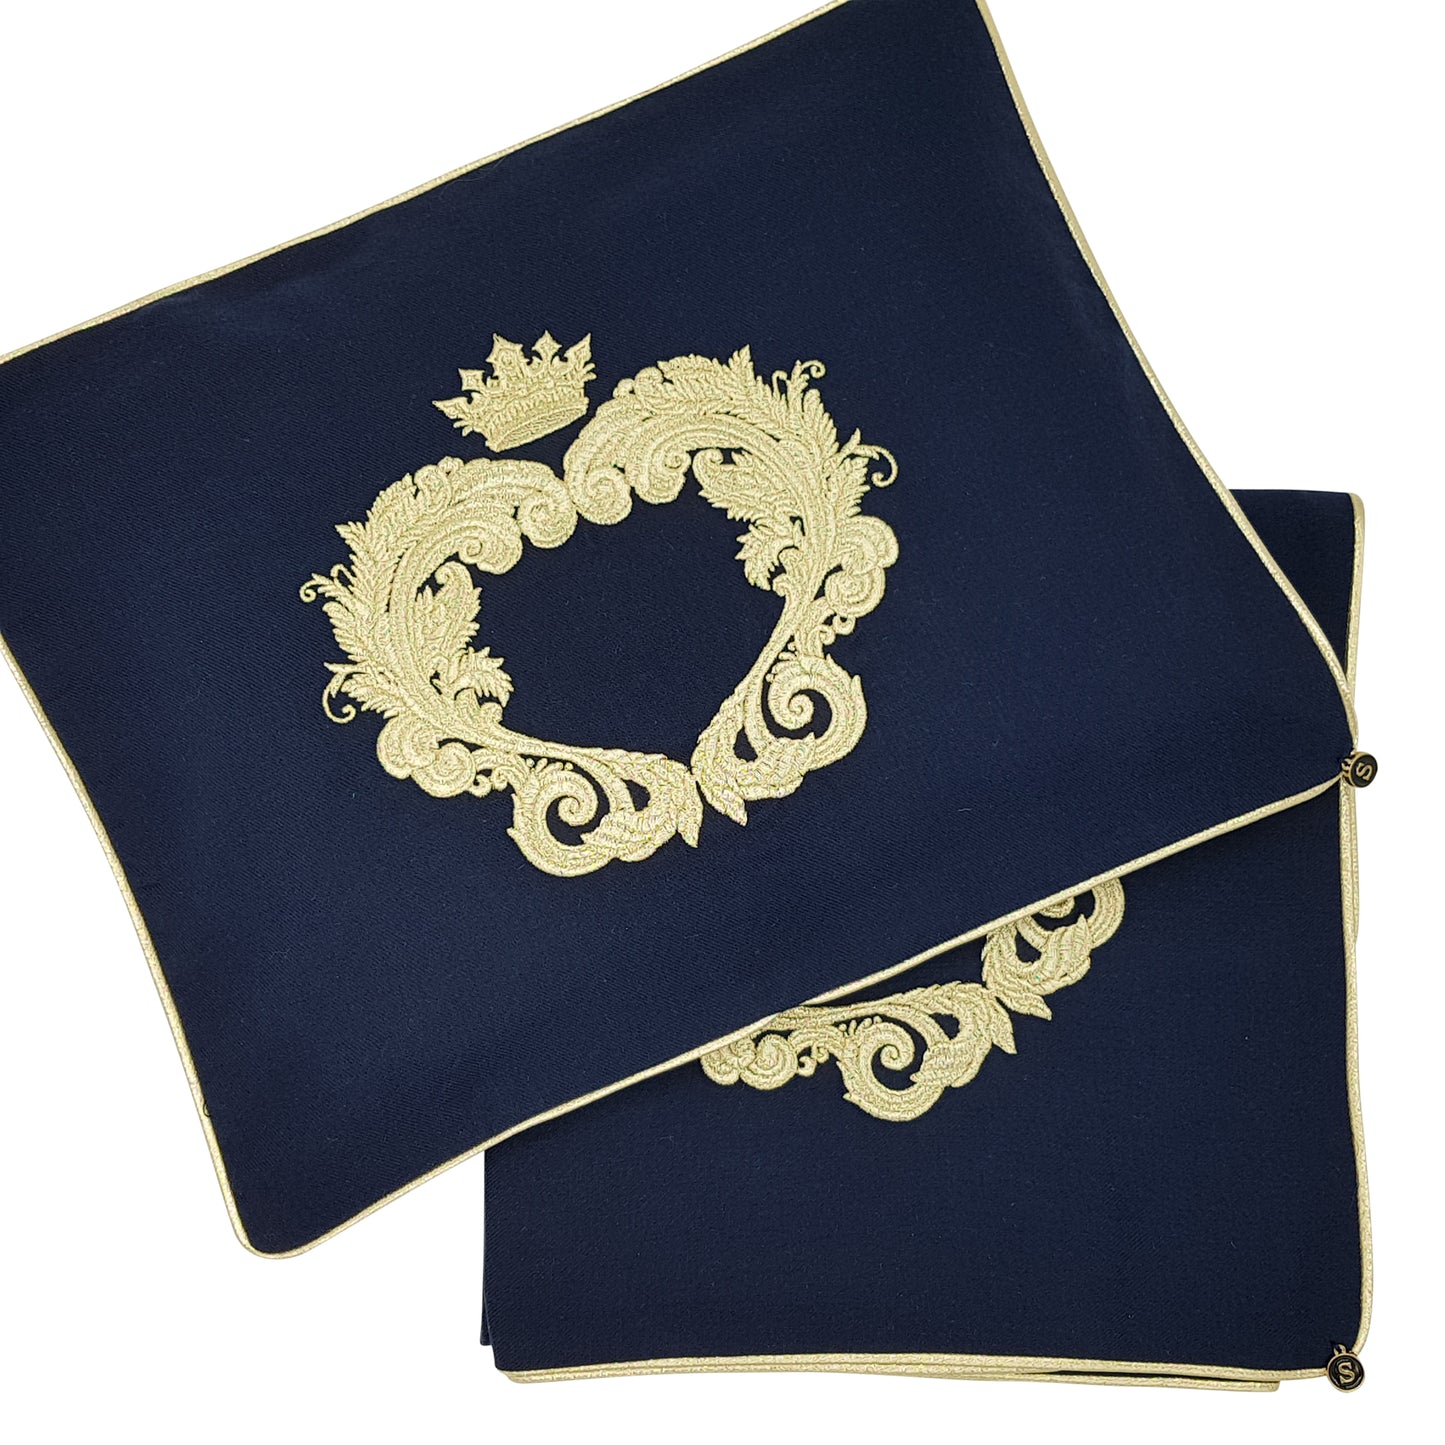 Limited Edition Baby Wrap & Pillowcase Set, Gold on Navy Cotton Blend